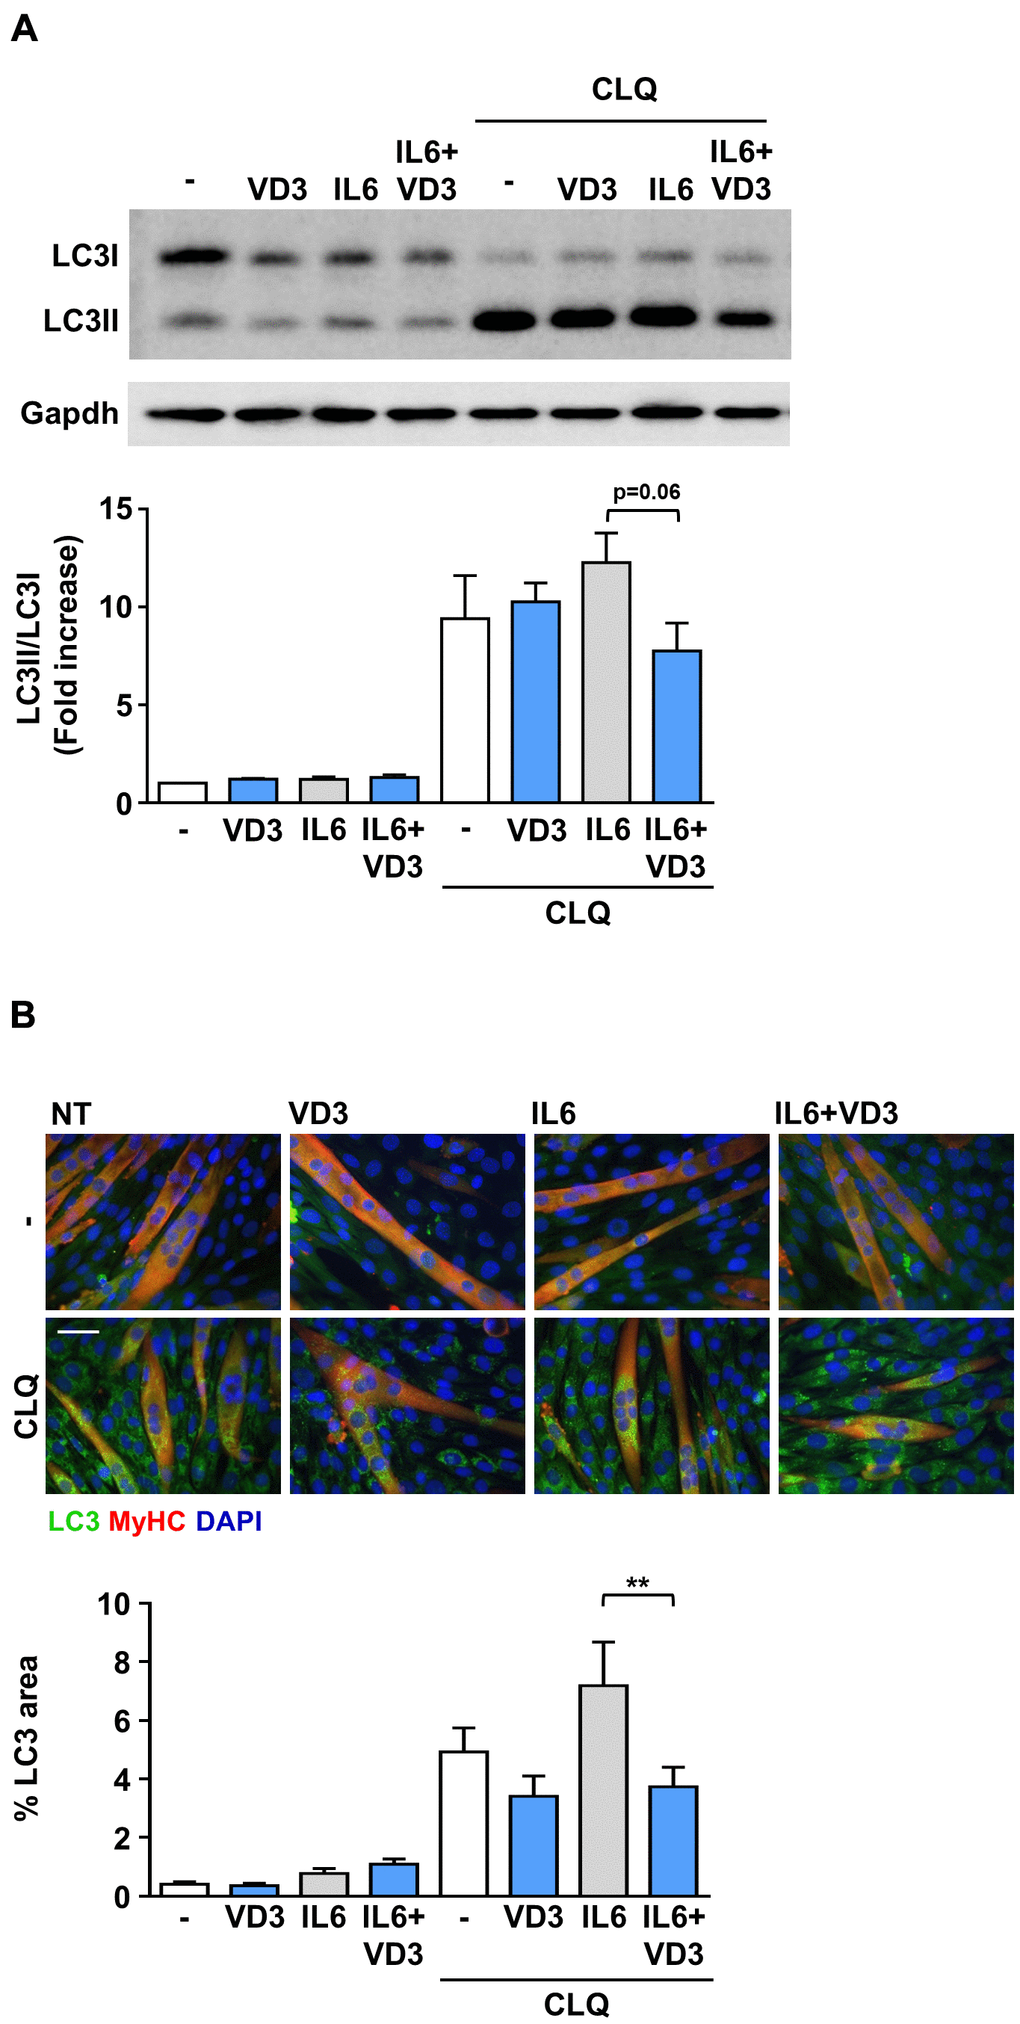 VD3 modulates the autophagic flux in IL6-treated C2C12 myotubes. C2C12 myotubes in DM were treated for 24 h with 100 nM VD3, 20ng/mL IL6, or their combination in the presence and absence of 10 μM of chloroquine (CLQ). The autophagosome marker LC3 was detected by western blotting (A) or immunofluorescence (B). Autophagic flux was assessed by quantifying the ratio of LC3 signal in the presence vs. absence of CLQ. For each panel, representative images are on the top and quantification on the bottom. Scale bar, 50 μm. **P 